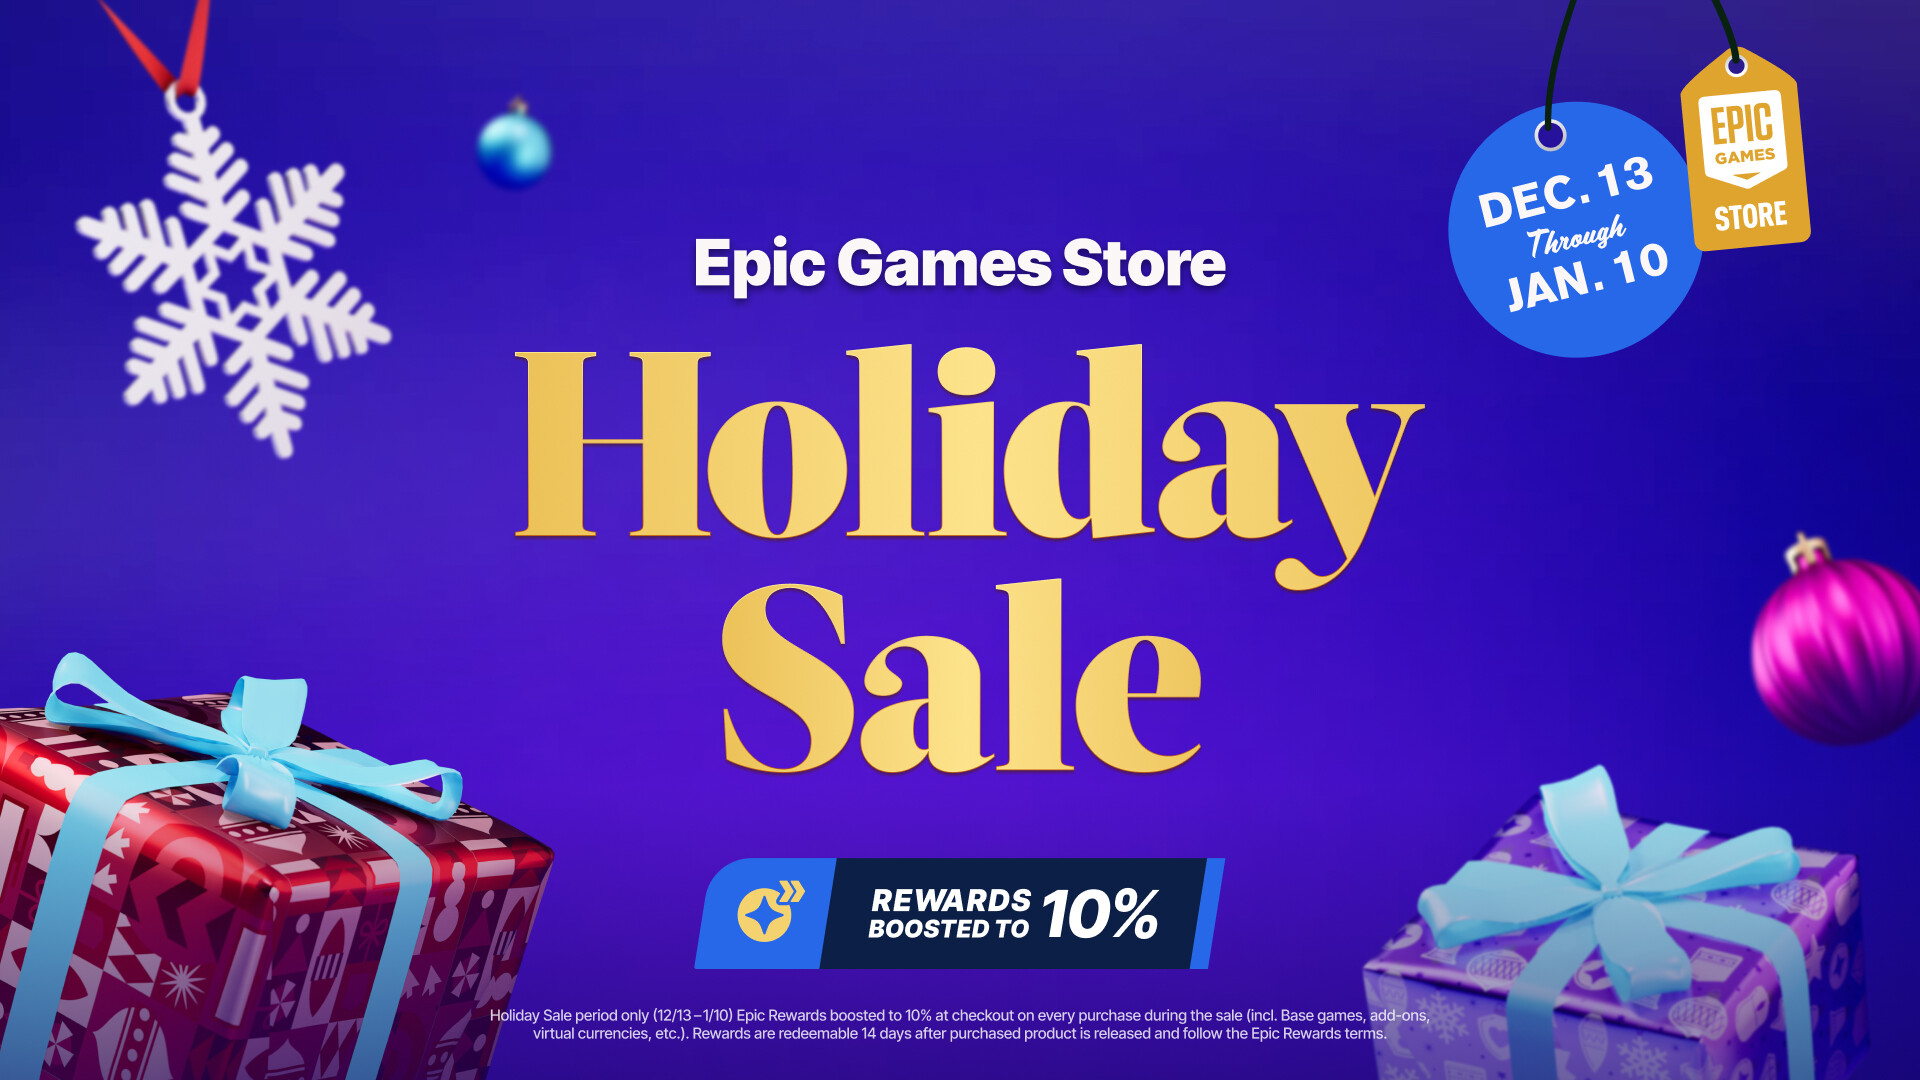 Epic Games is celebrating the holidays with 15 free titles starting from  Dec 17 